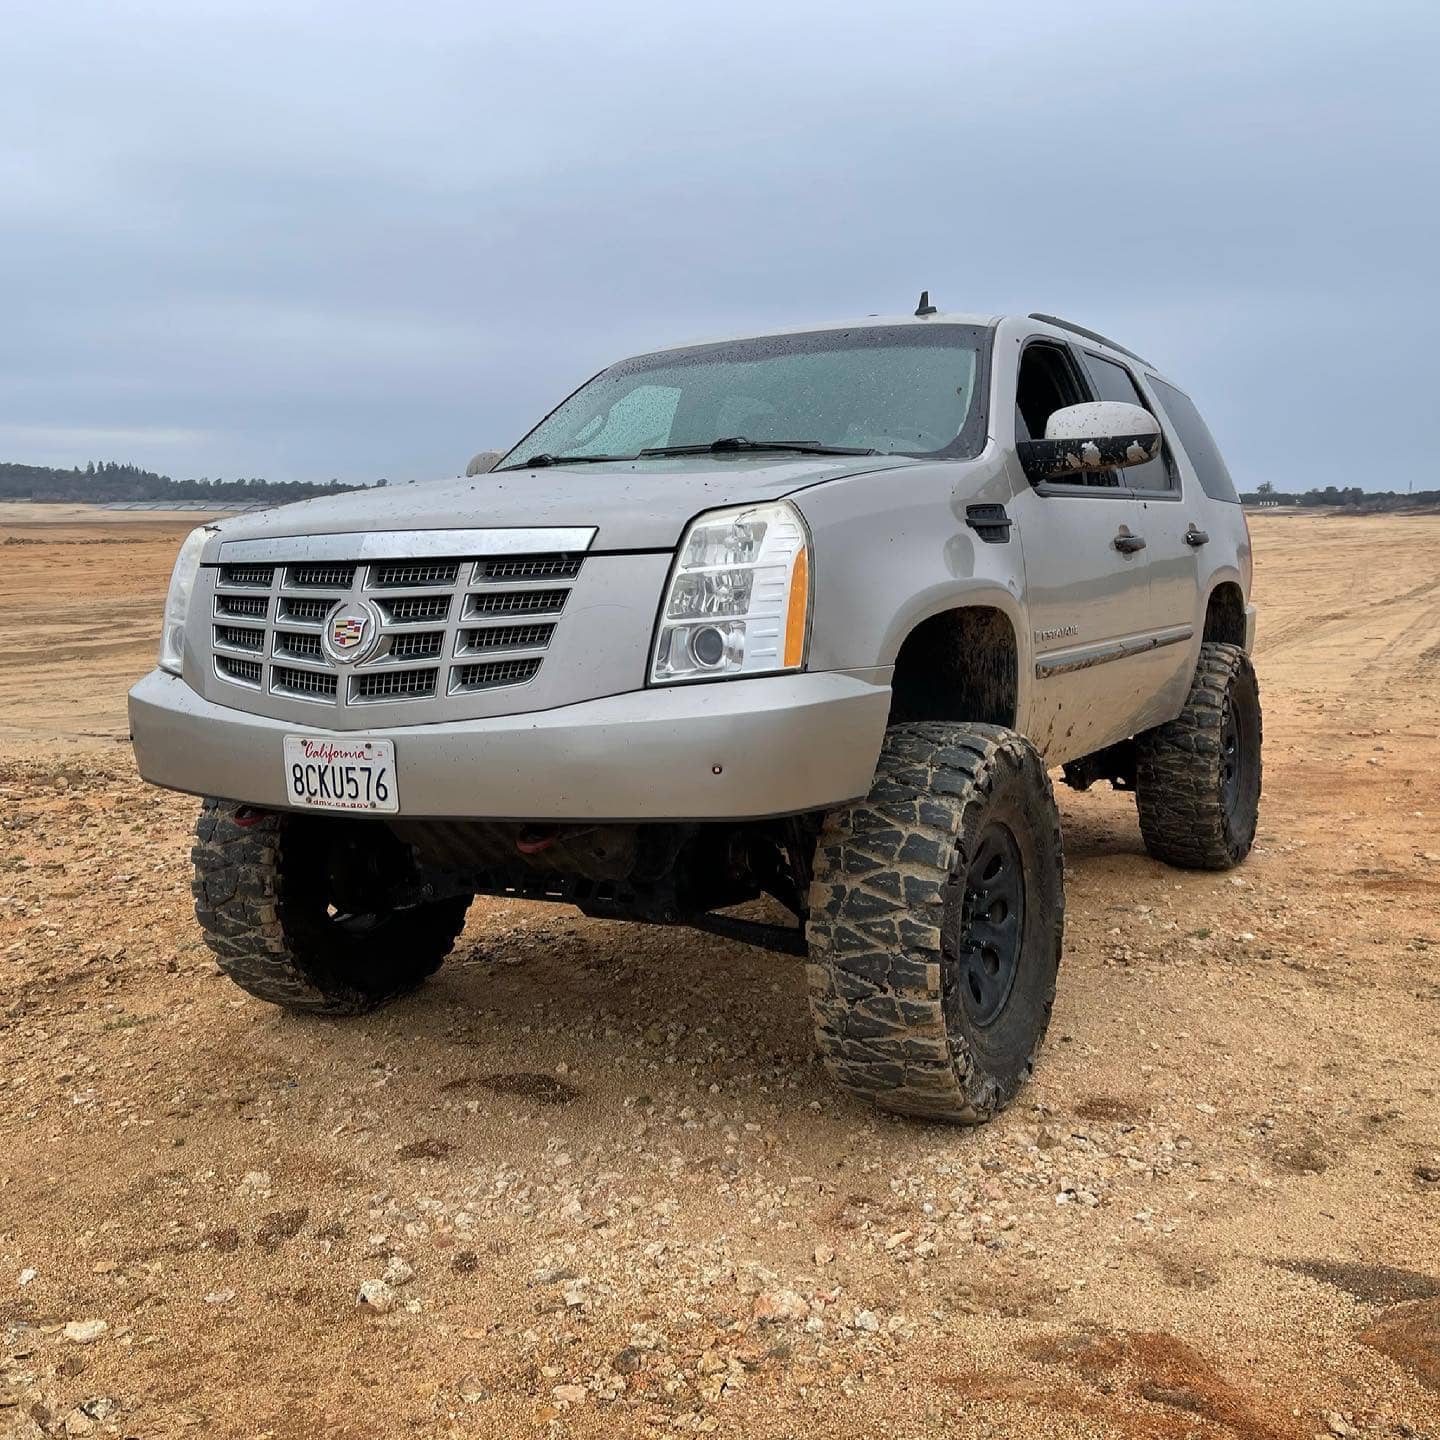 Lifted Cadillac Escalade on 37 inch offroad tires